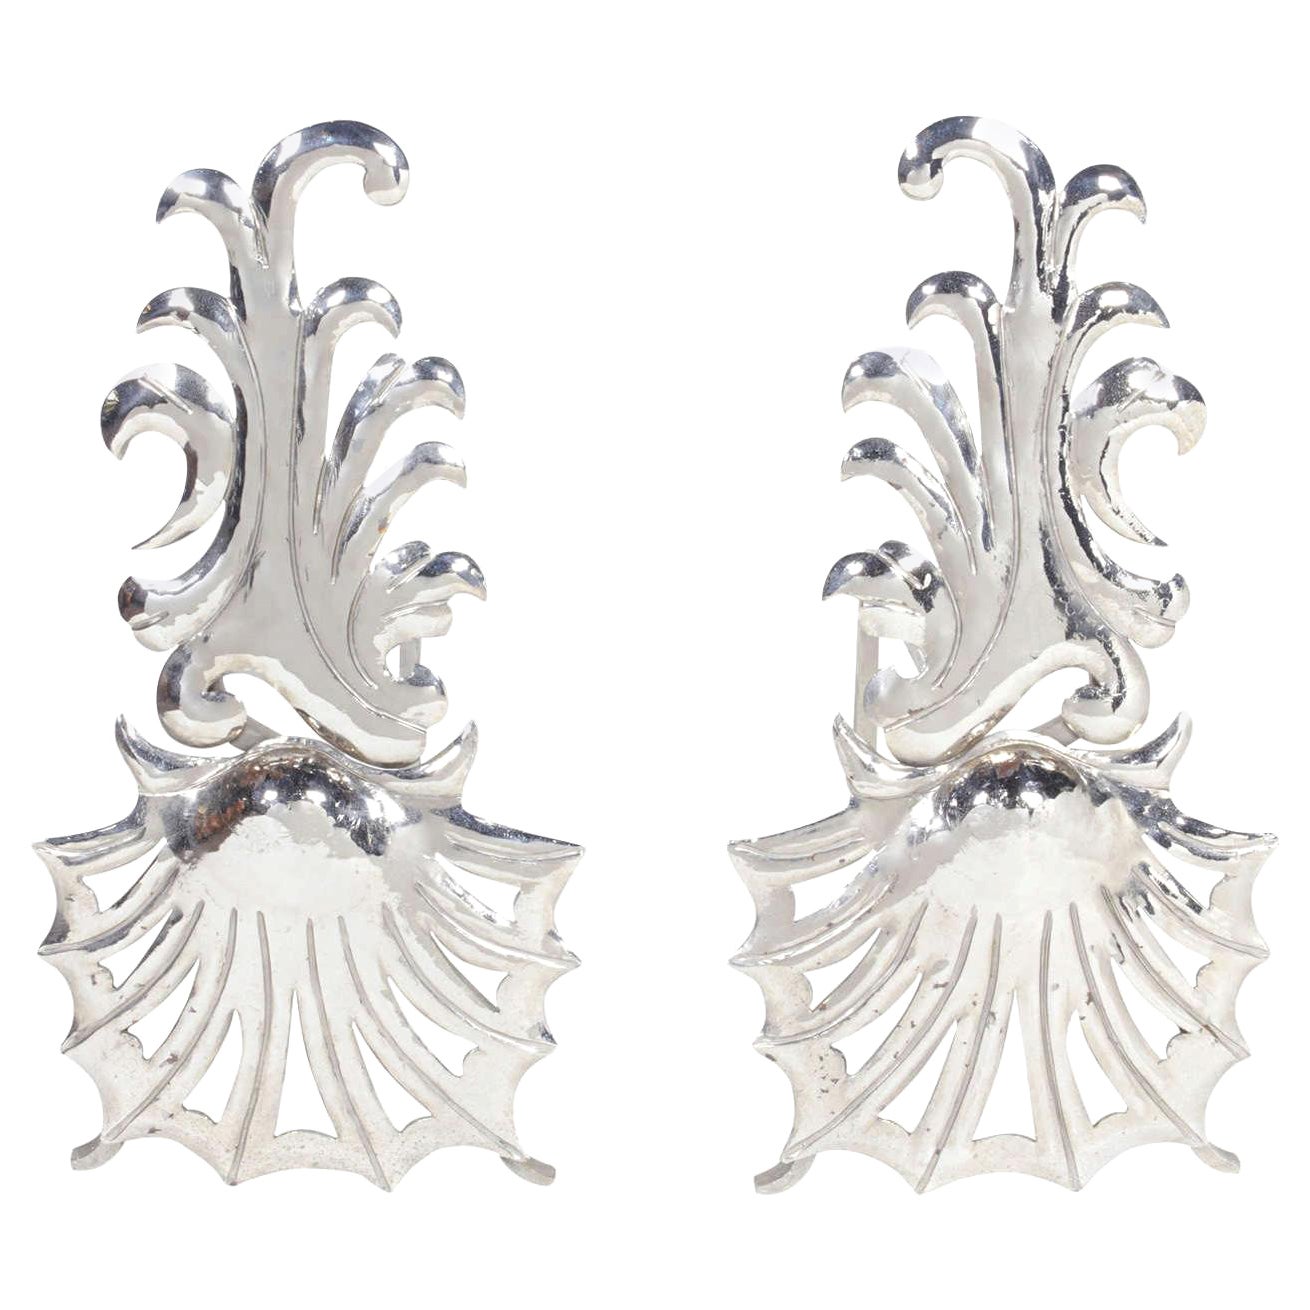 Art Deco Coastal Andirons in Hammered Nickel Plated Iron, c. 1980's